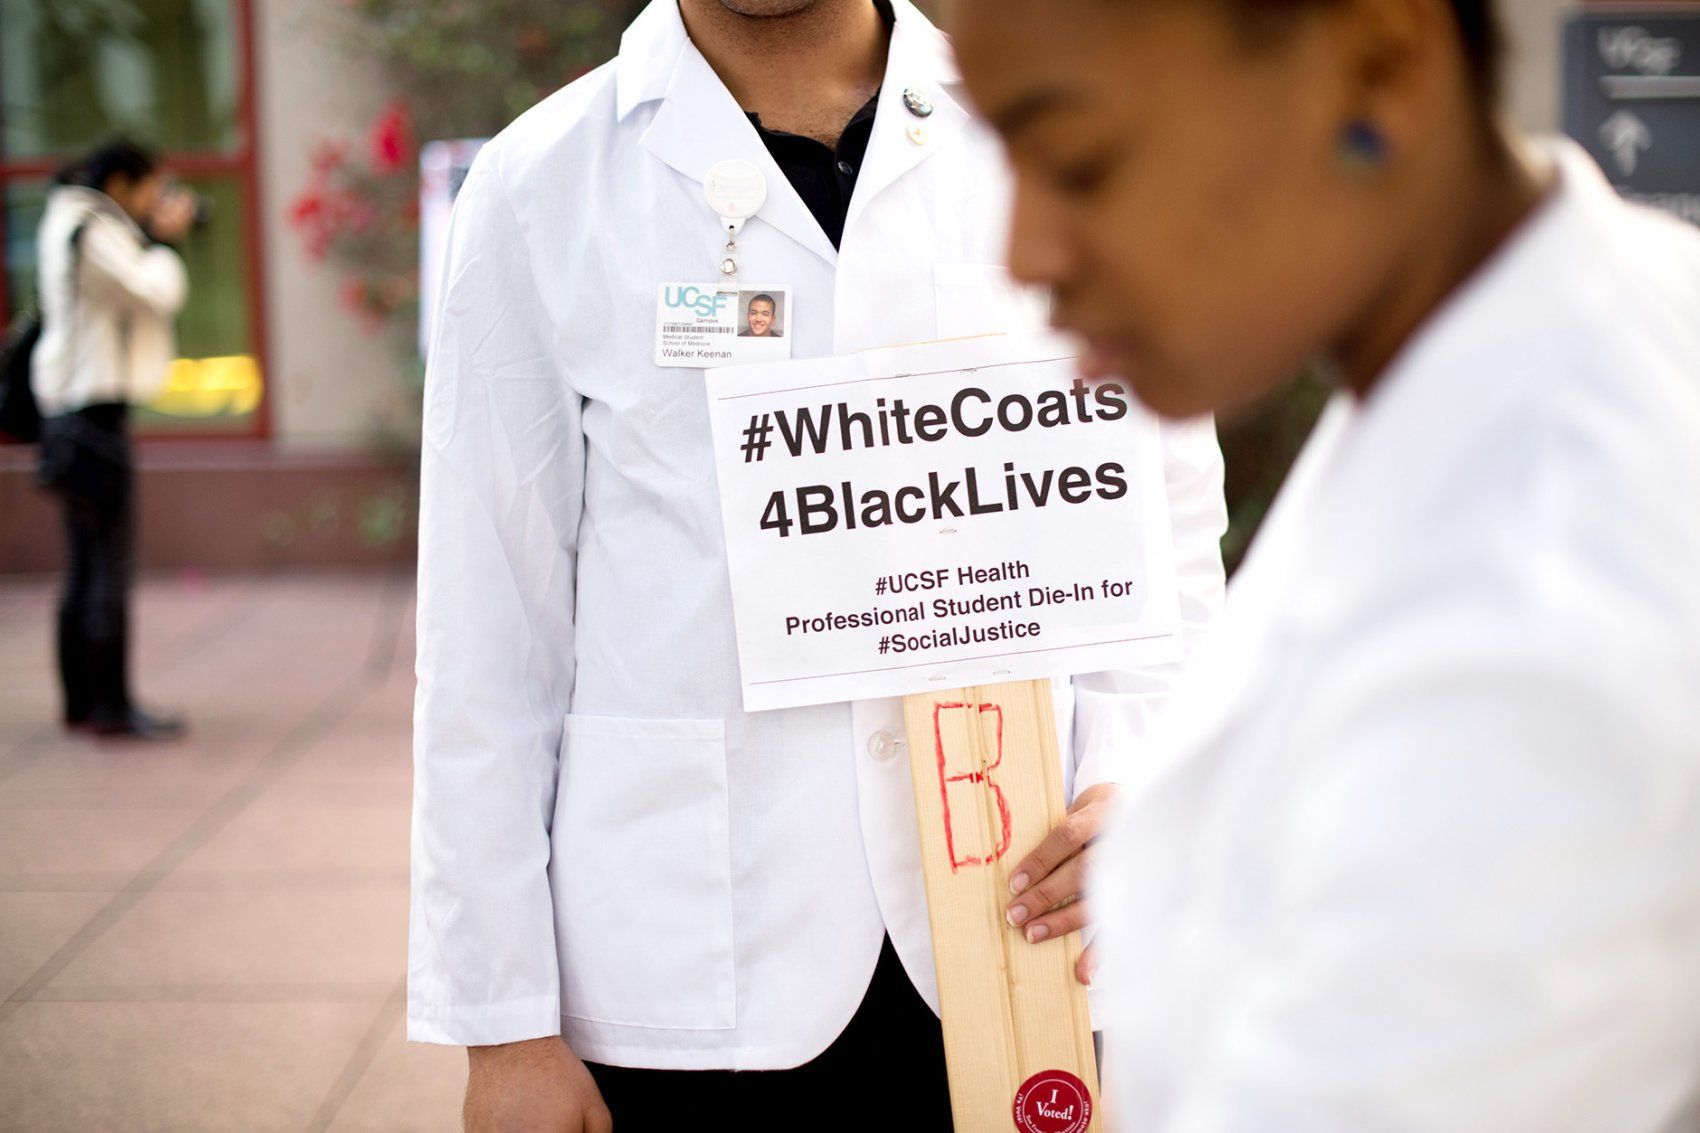 a student in a white coat holds a sign that says #WhiteCoats3BlackLives